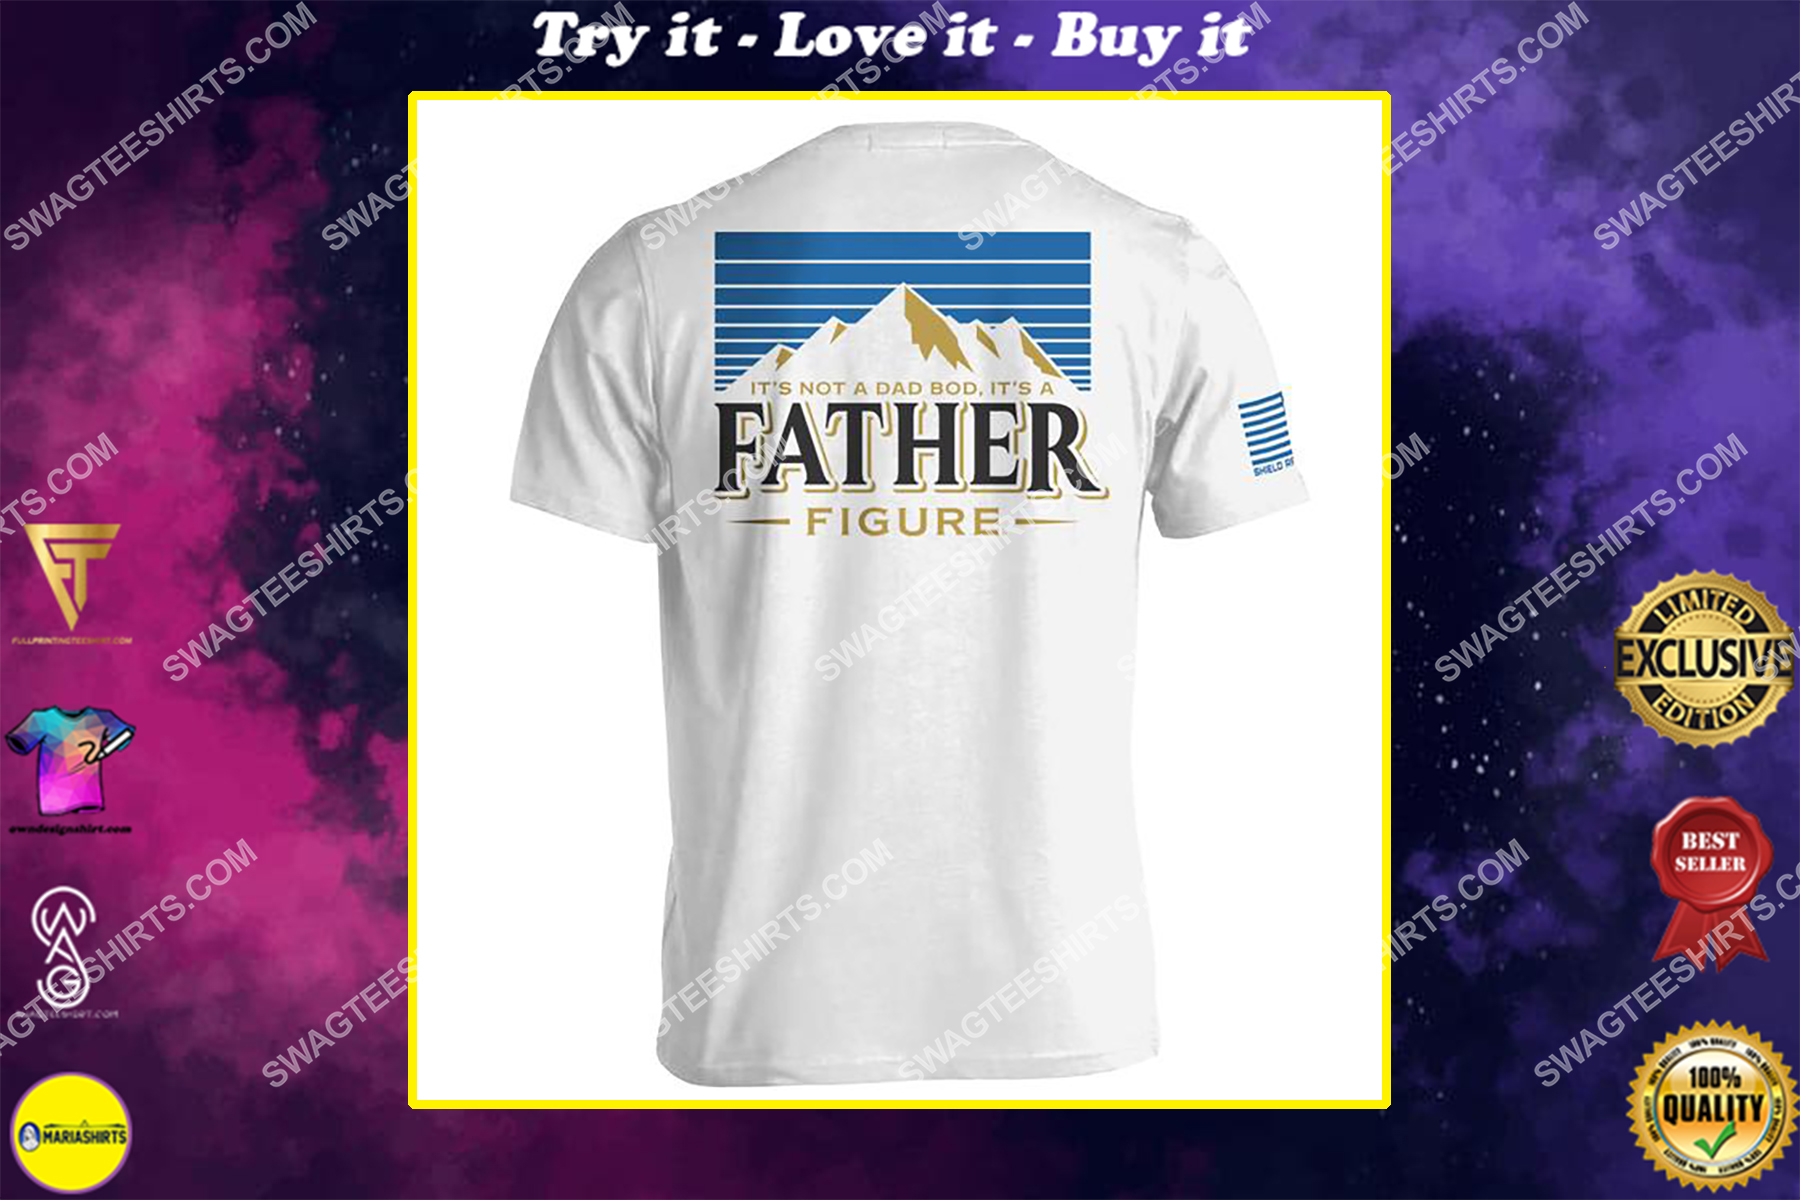 fathers day its not a dad bod its a father figure shirt